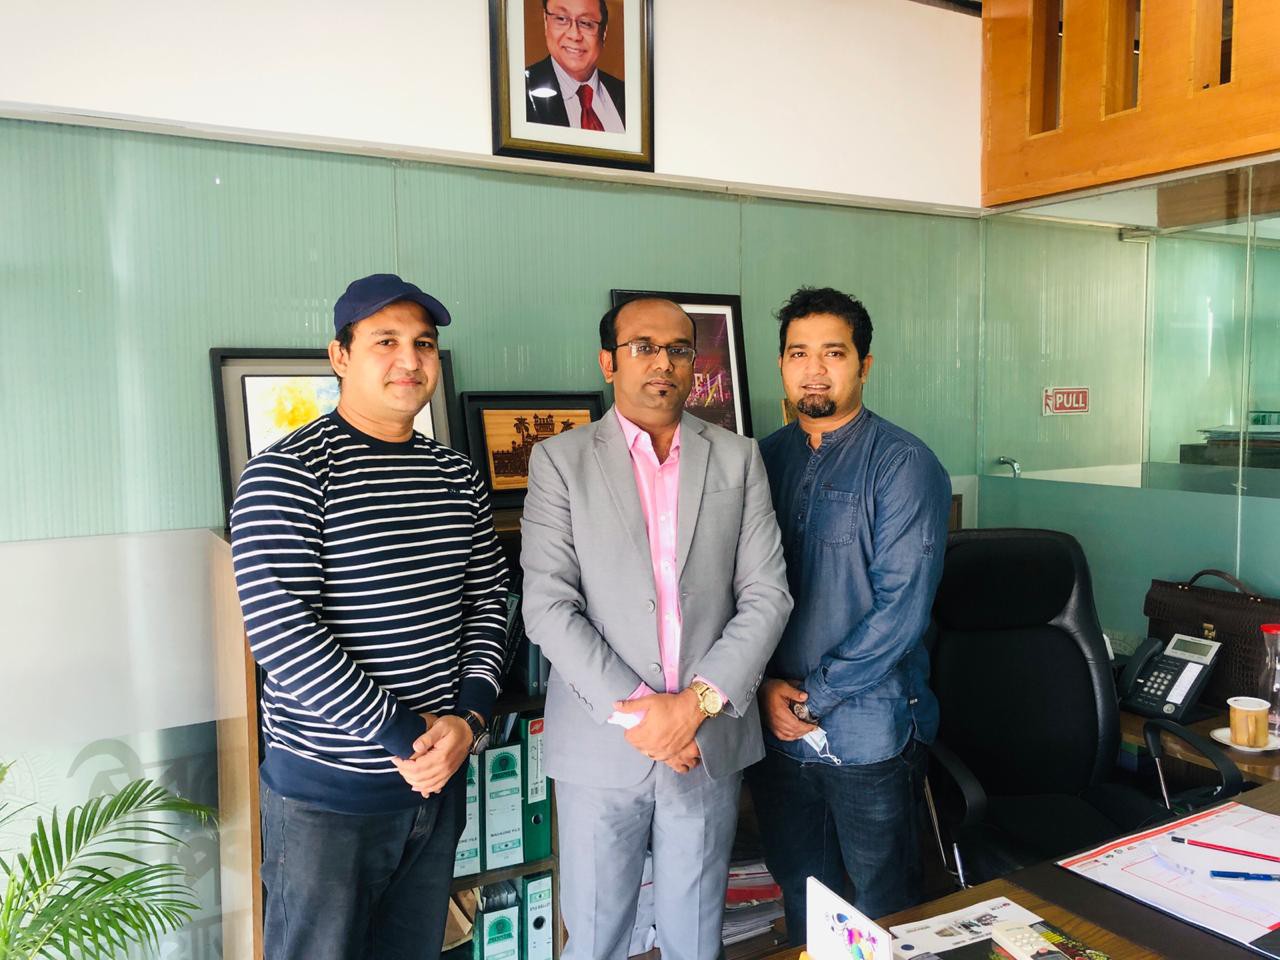 A meeting was held at the ICCB in Dhaka on the occasion of the 10th Agro Tech Bangladesh 2021